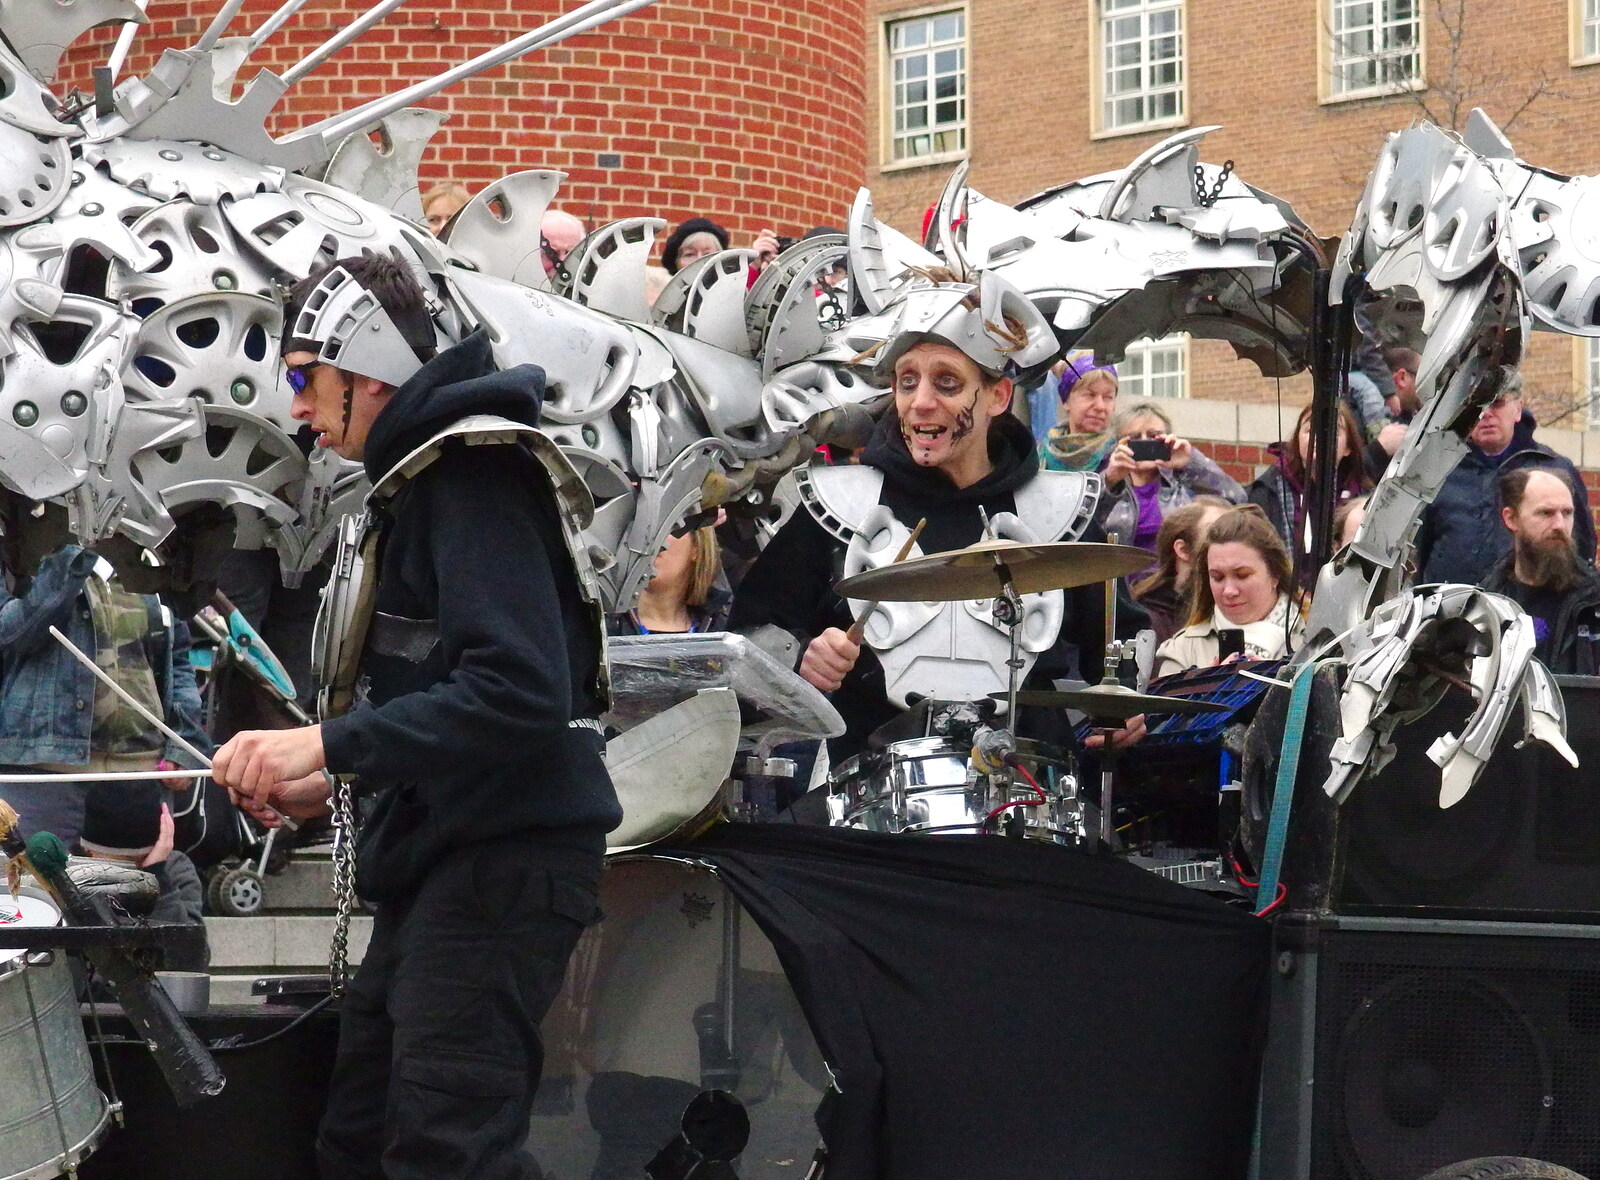 Metal Mickey on drums from A Dragoney Sort of Day, Norwich, Norfolk - 15th February 2014